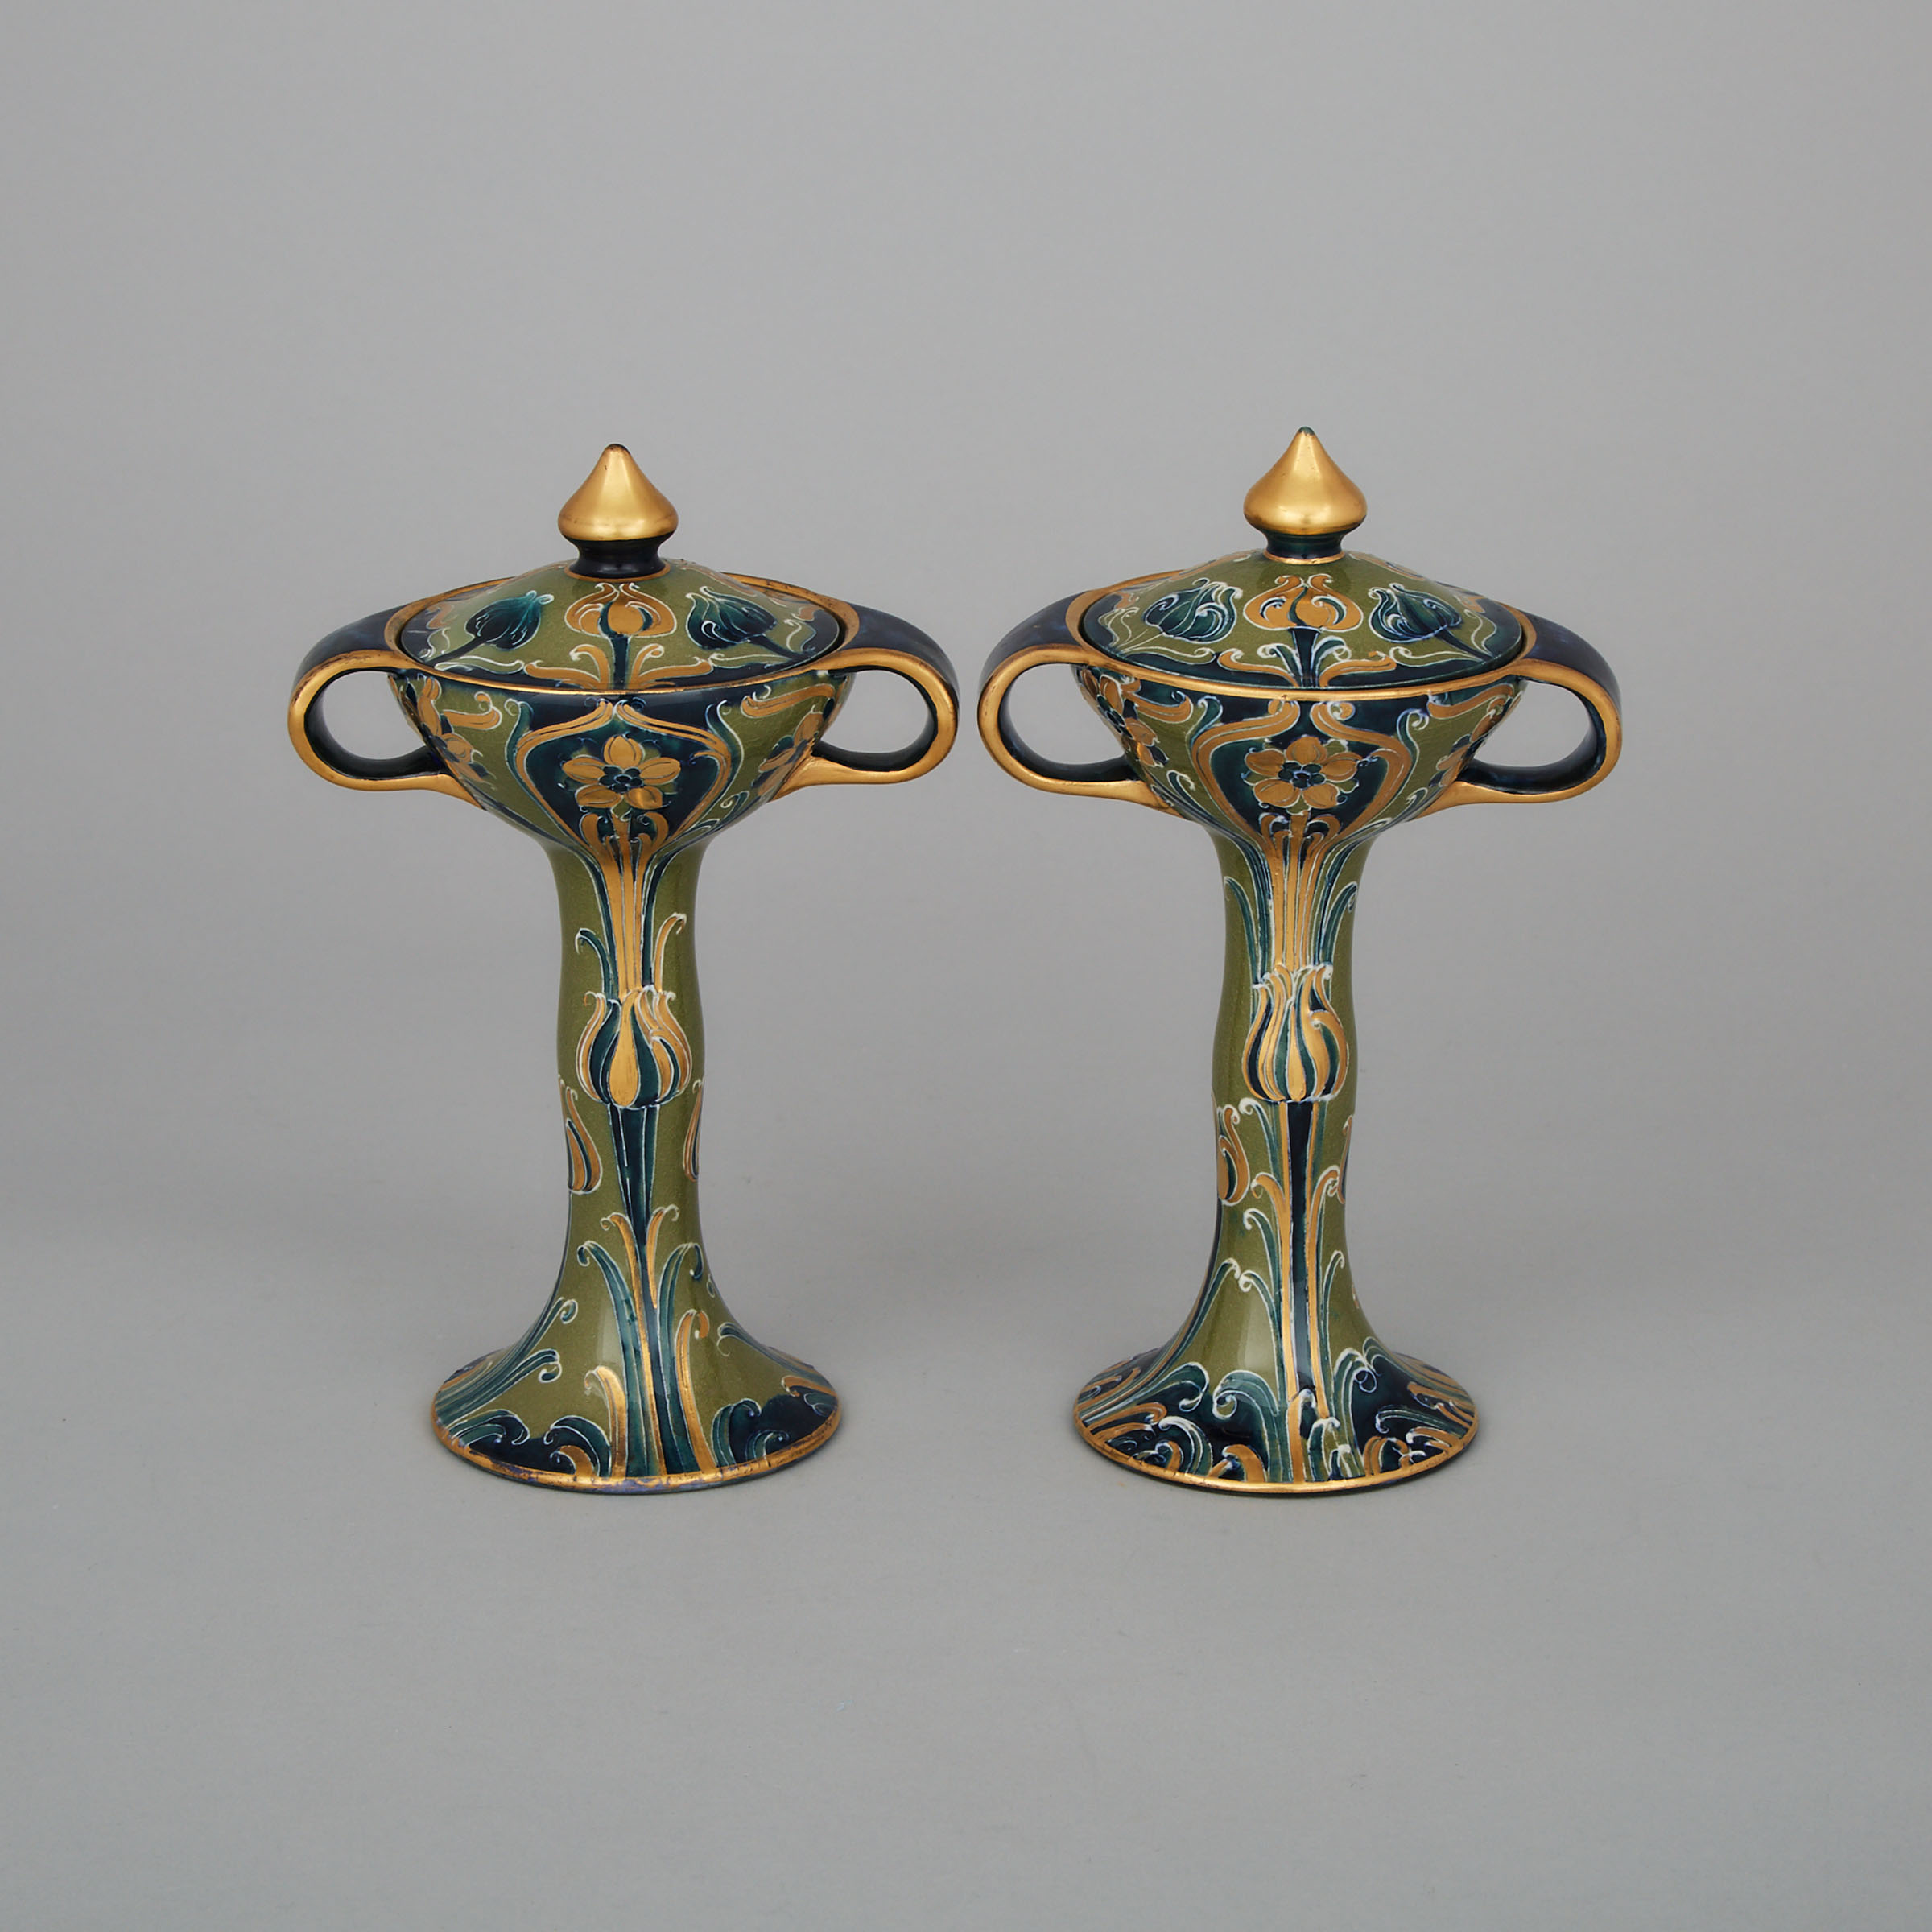 Pair of Moorcroft Green and Gold Florian Small Covered Bonbonnières, c.1903